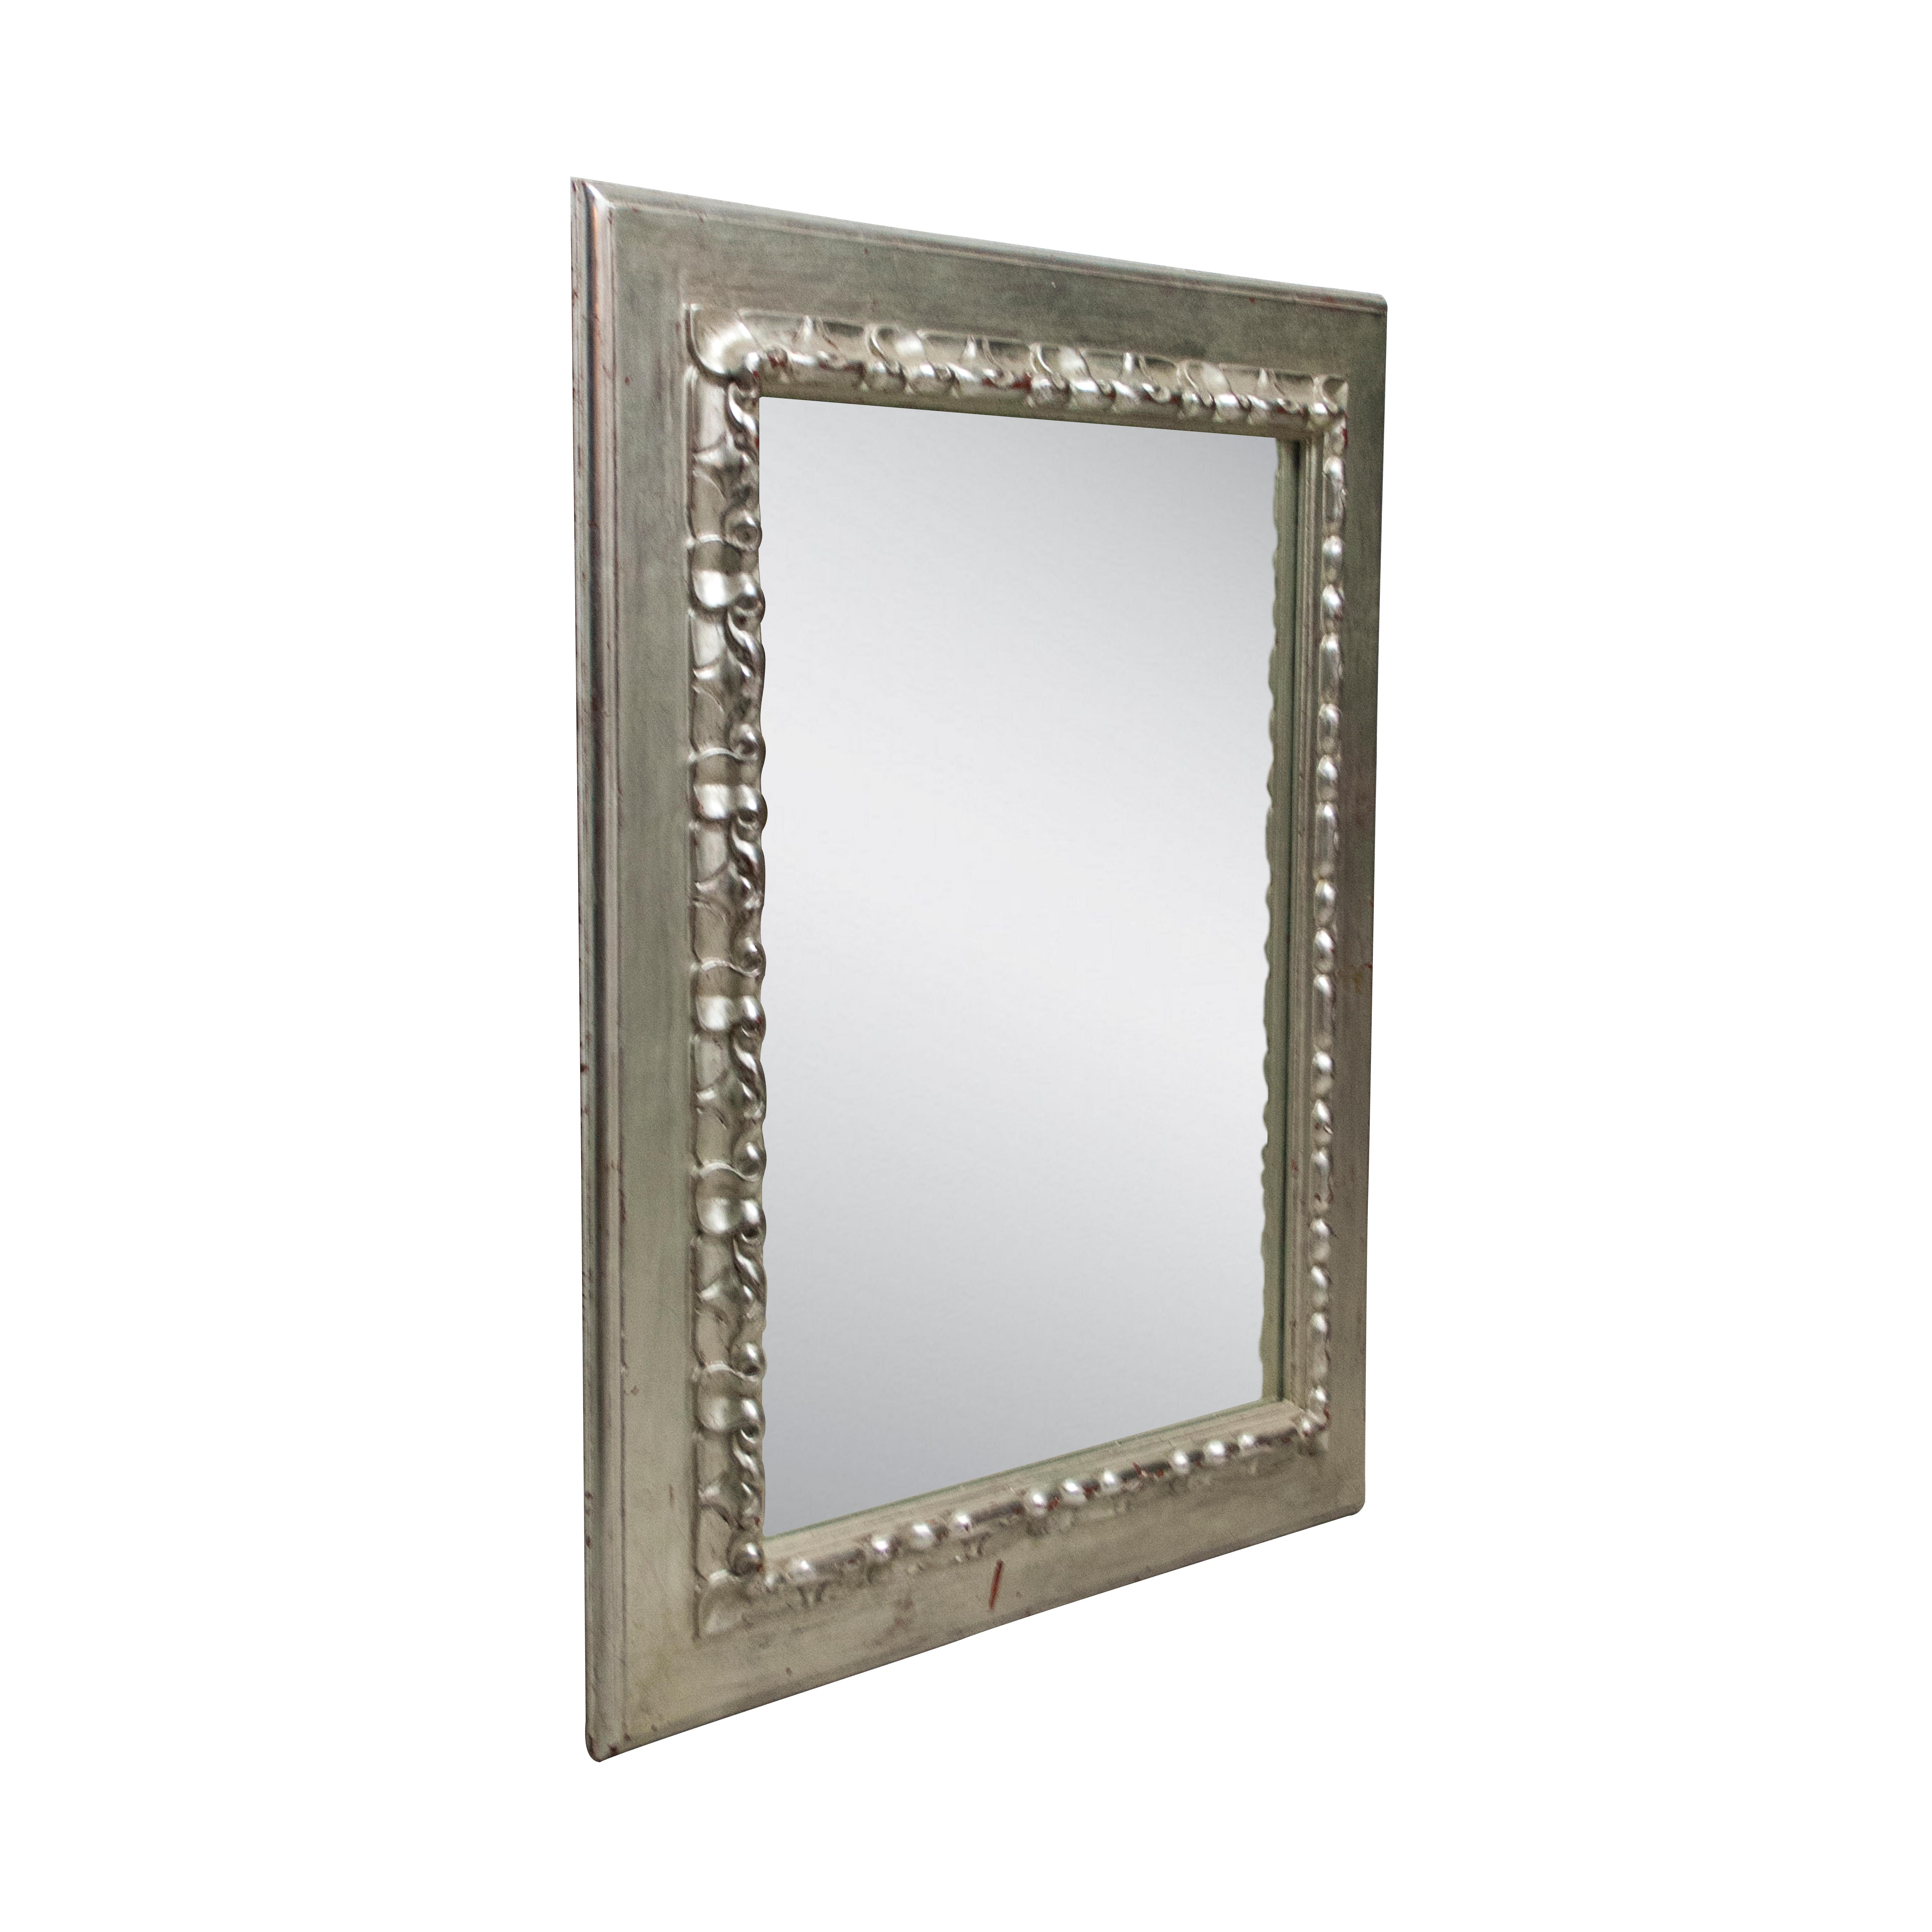 Neoclassical Regency style handcrafted mirror. Rectangular hand carved wooden structure with silver foiled finish, Spain, 1970.